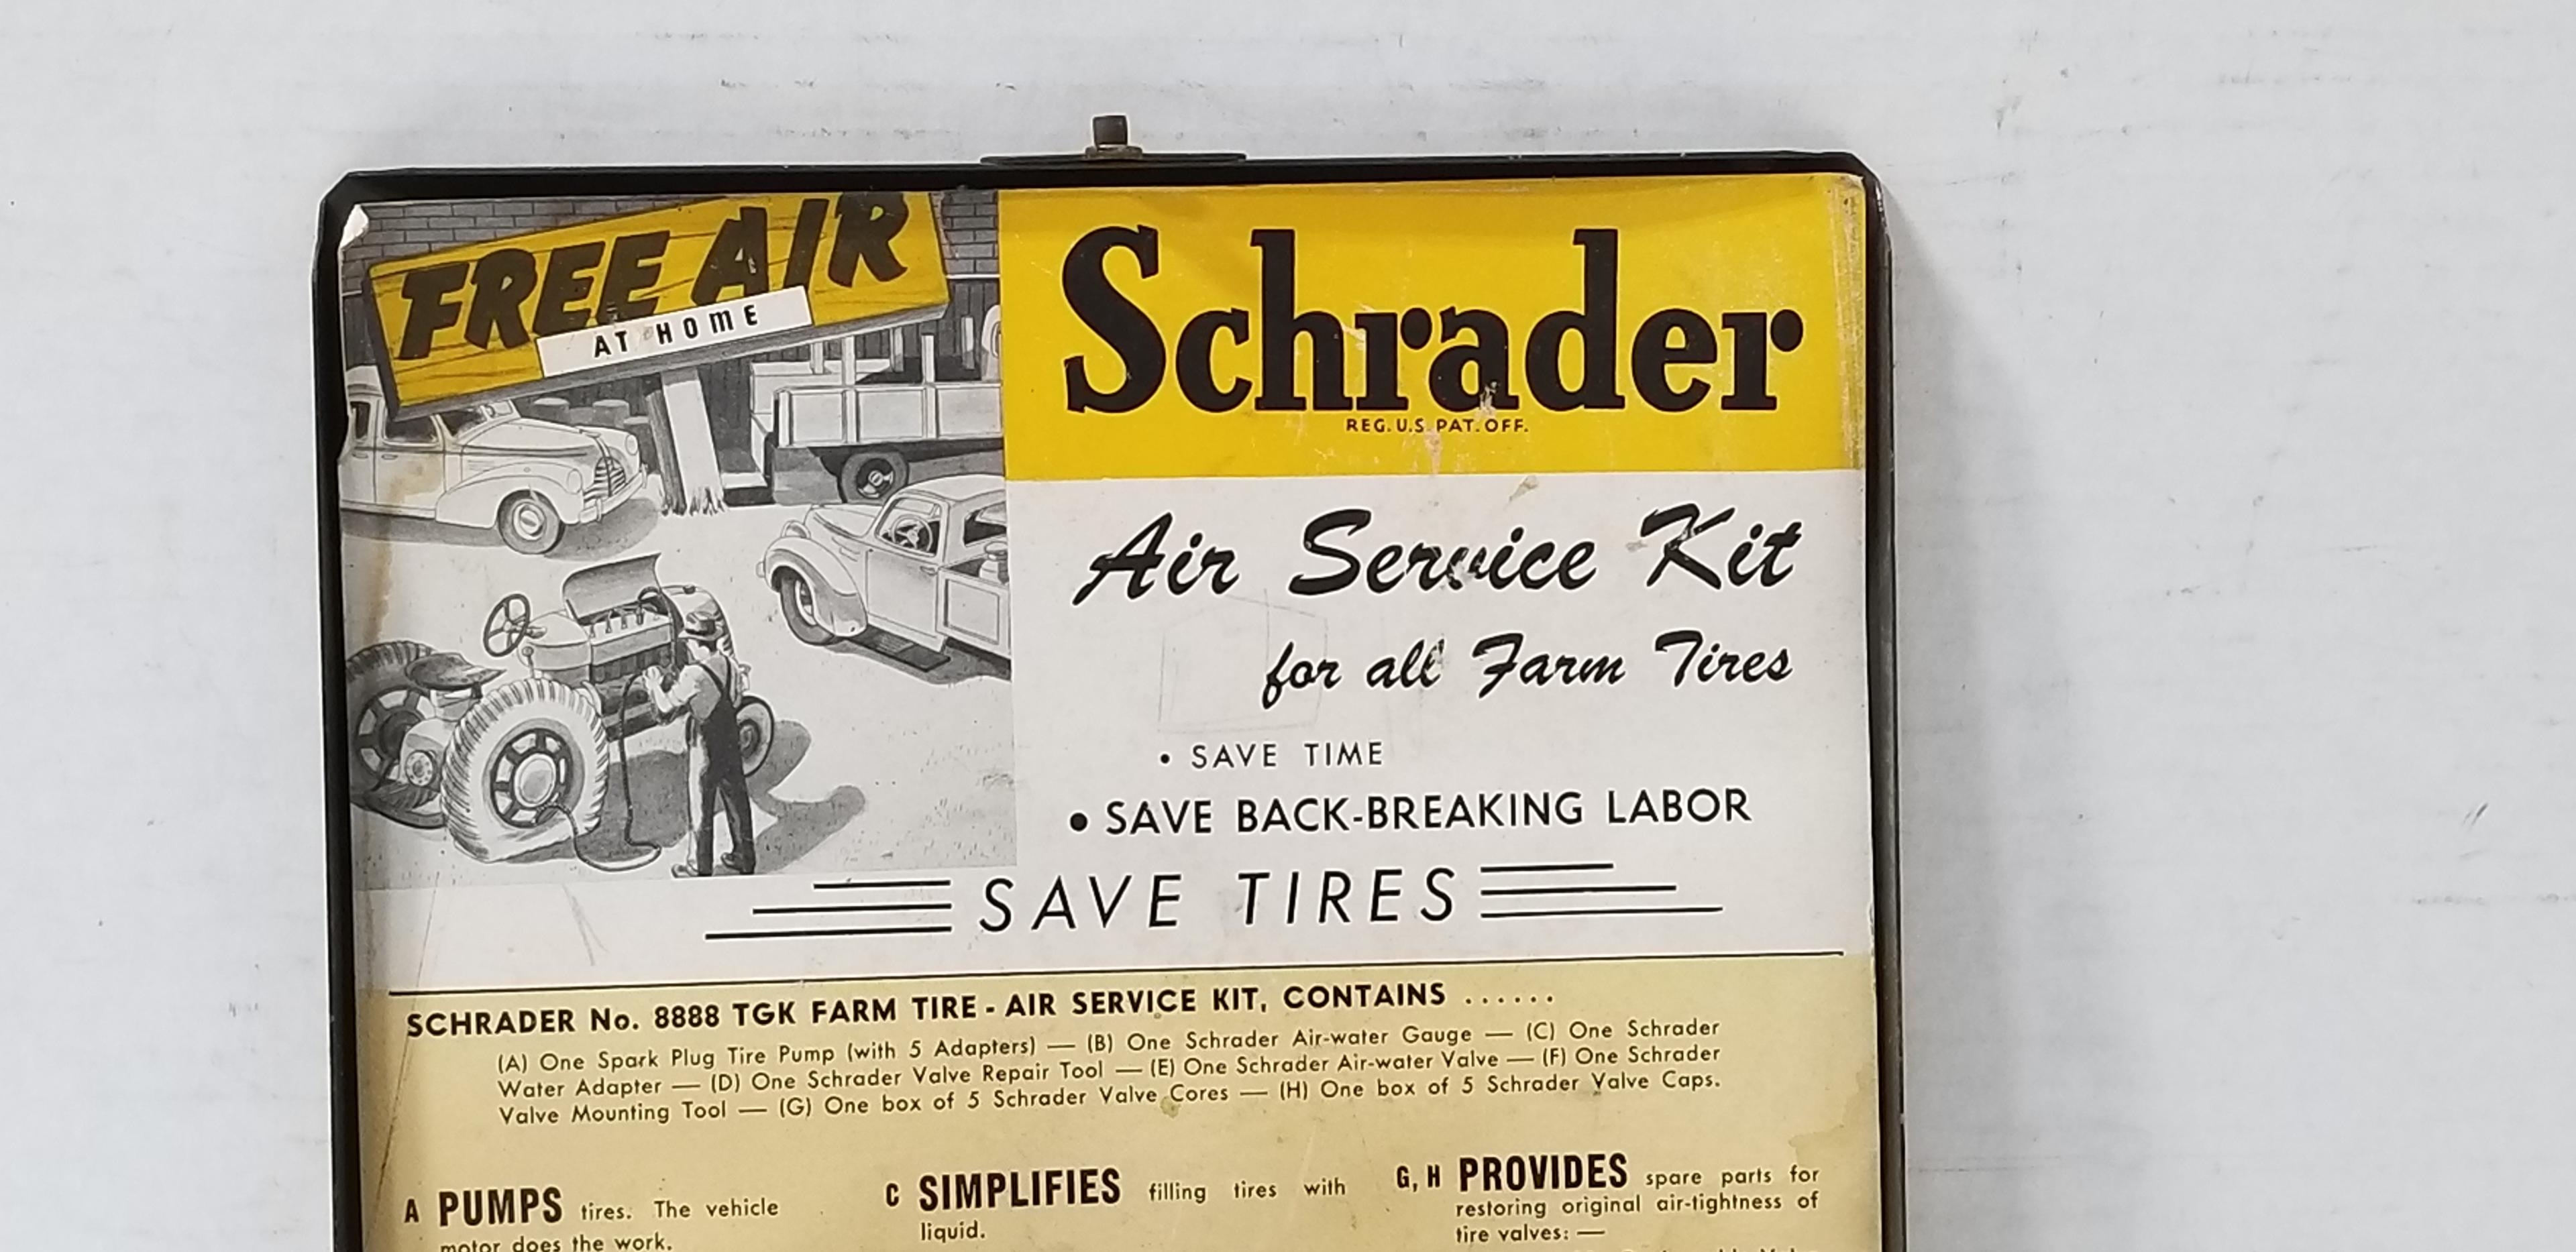 SCHRADER AIR SERVICE KIT FOR ALL FARM TIRES